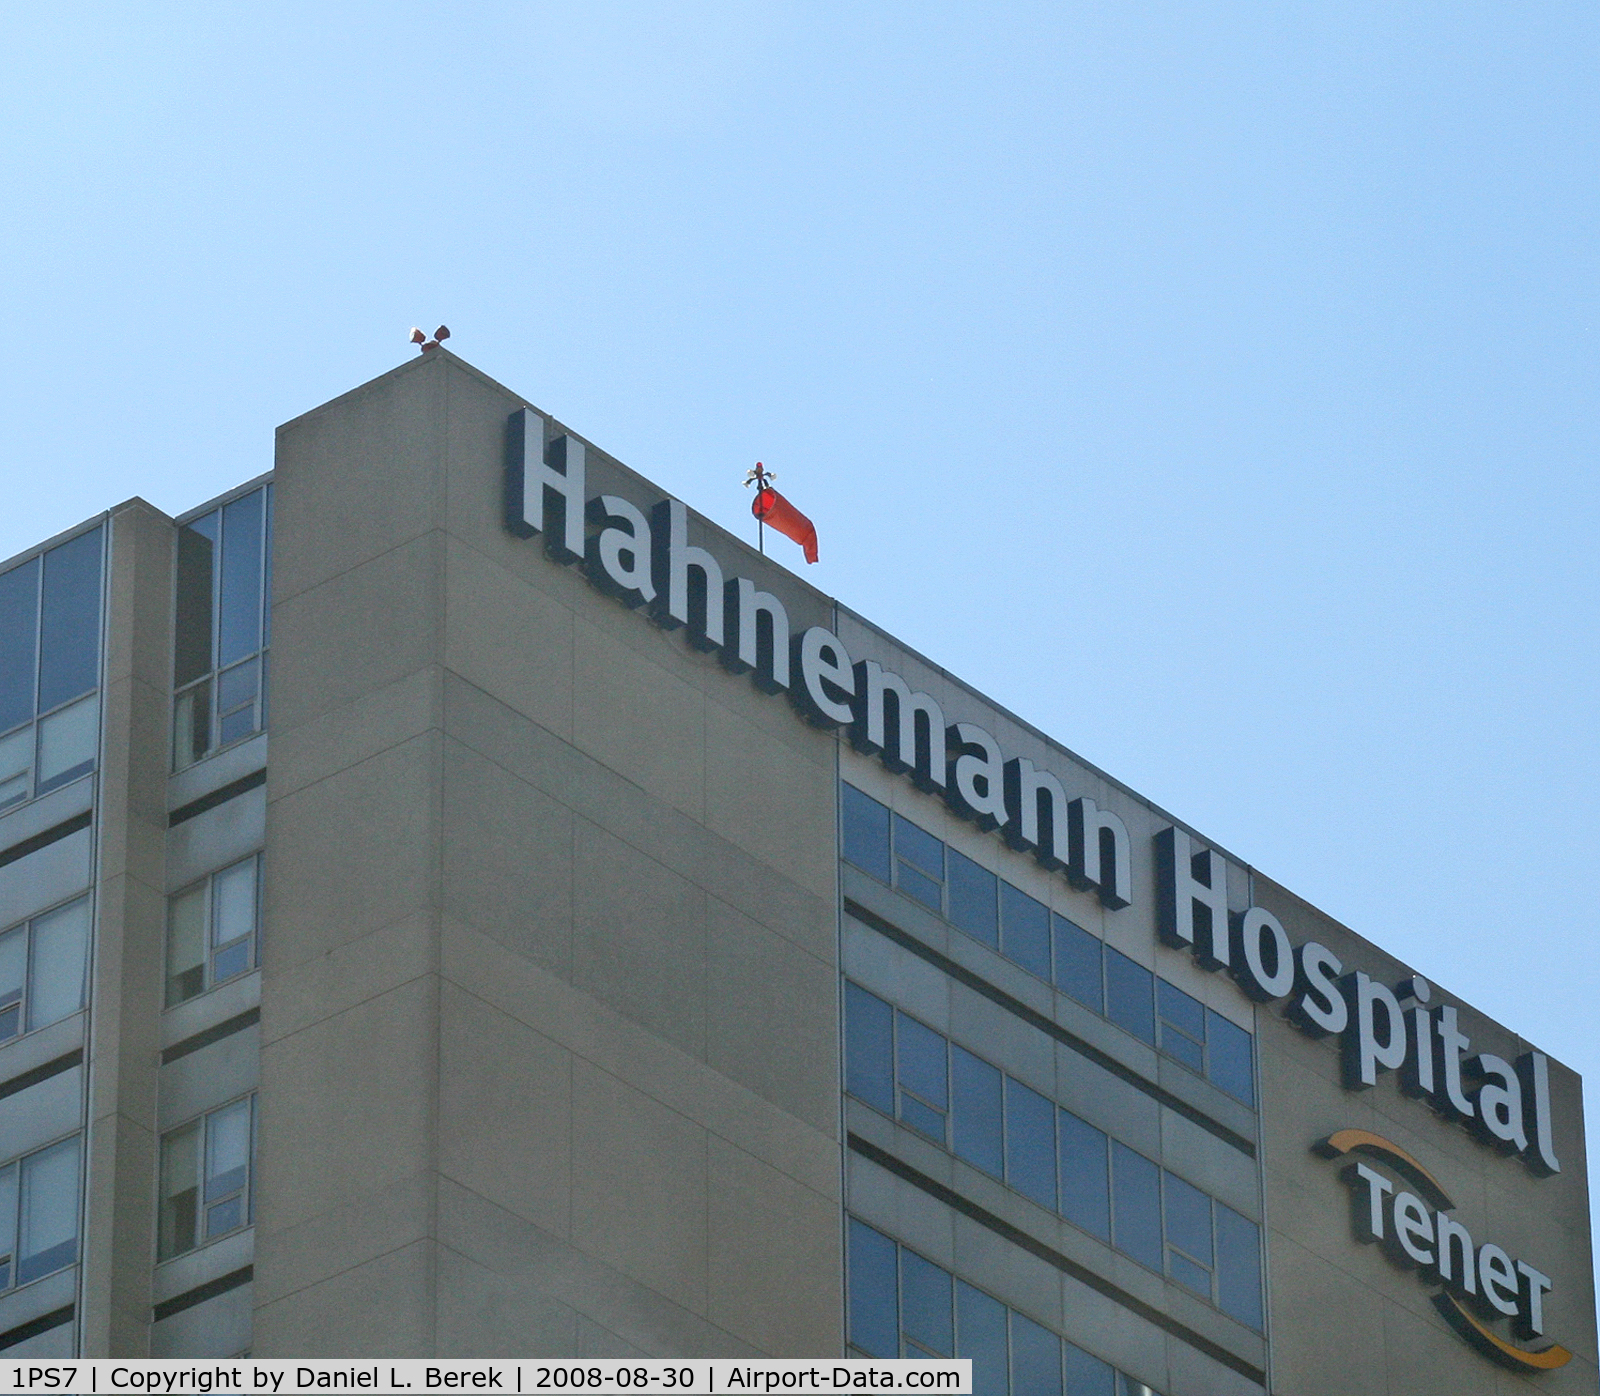 Hahnemann Heliport (1PS7) - Hanemann Hospital is one of several in downtown Philly with a heliport.